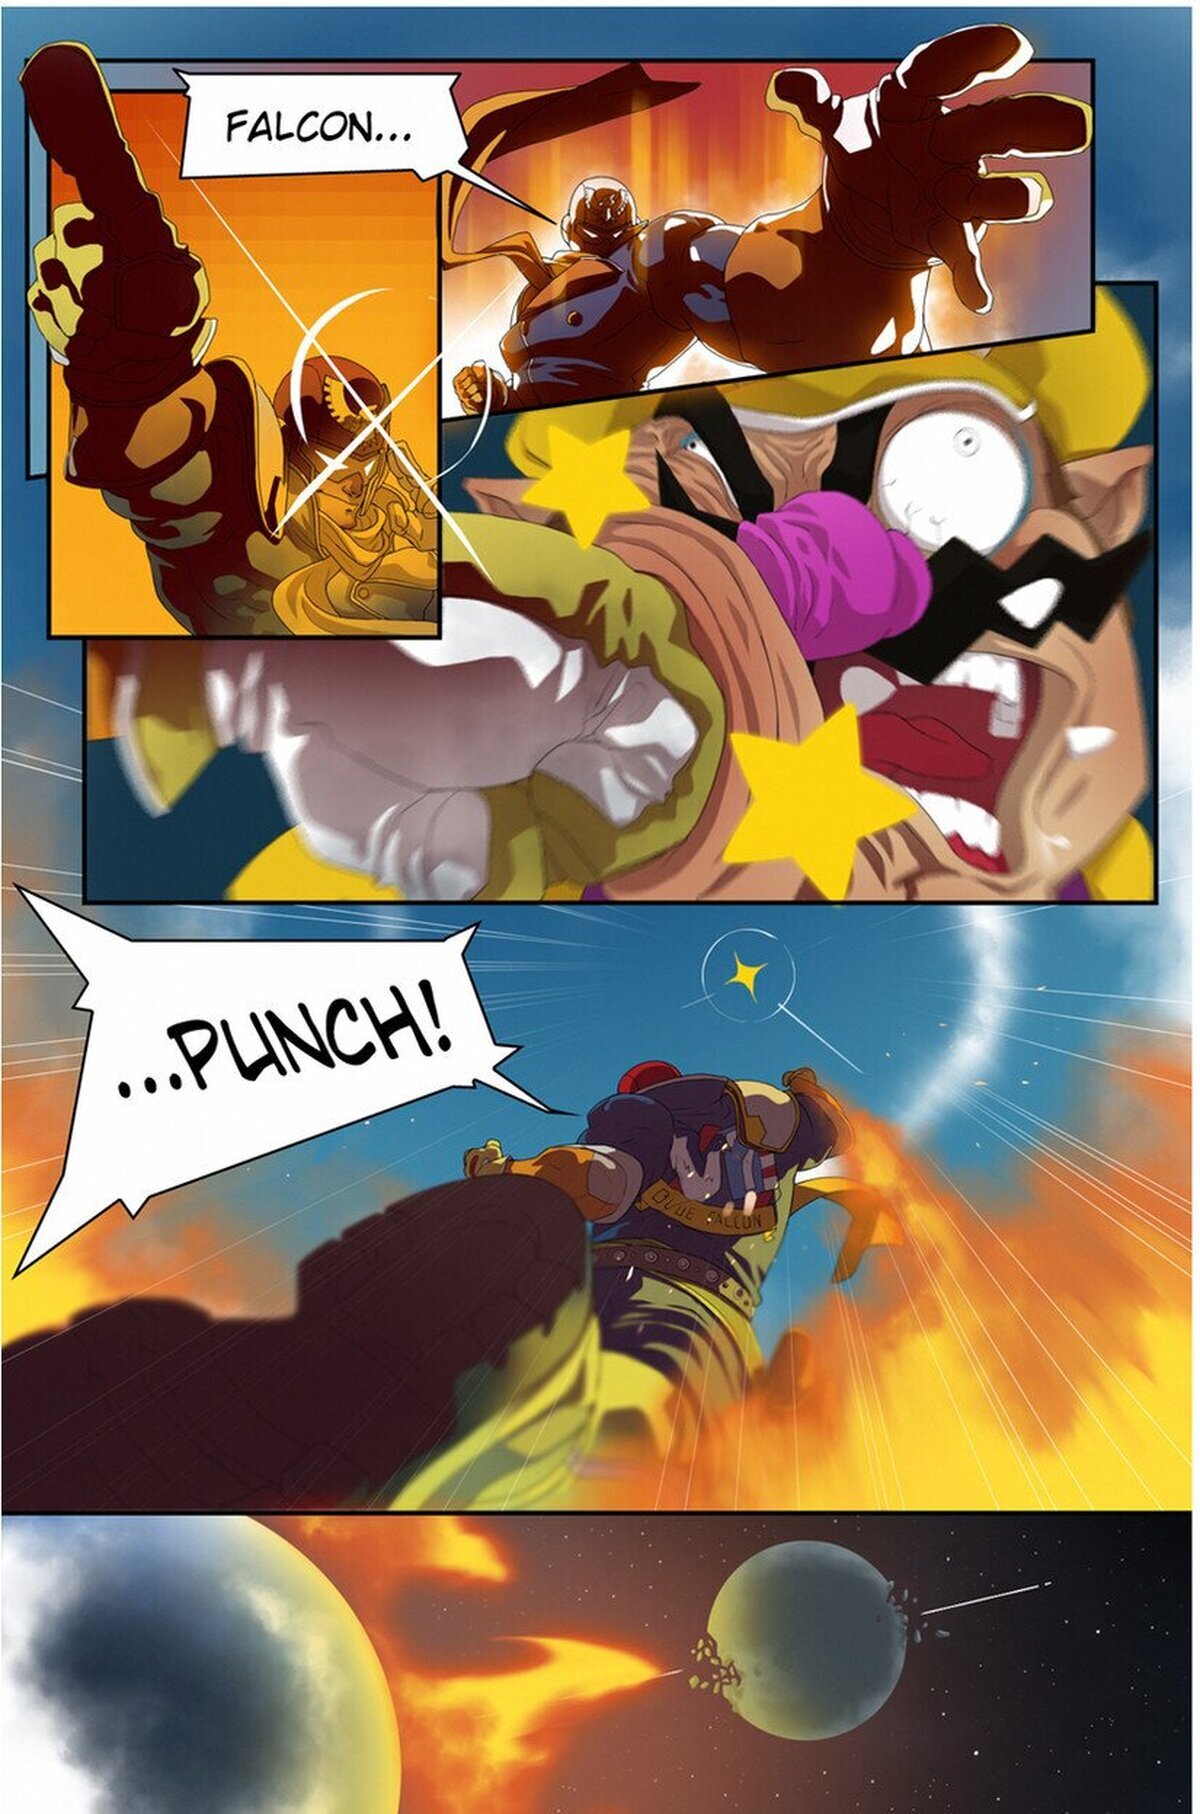 One Falcon Punch